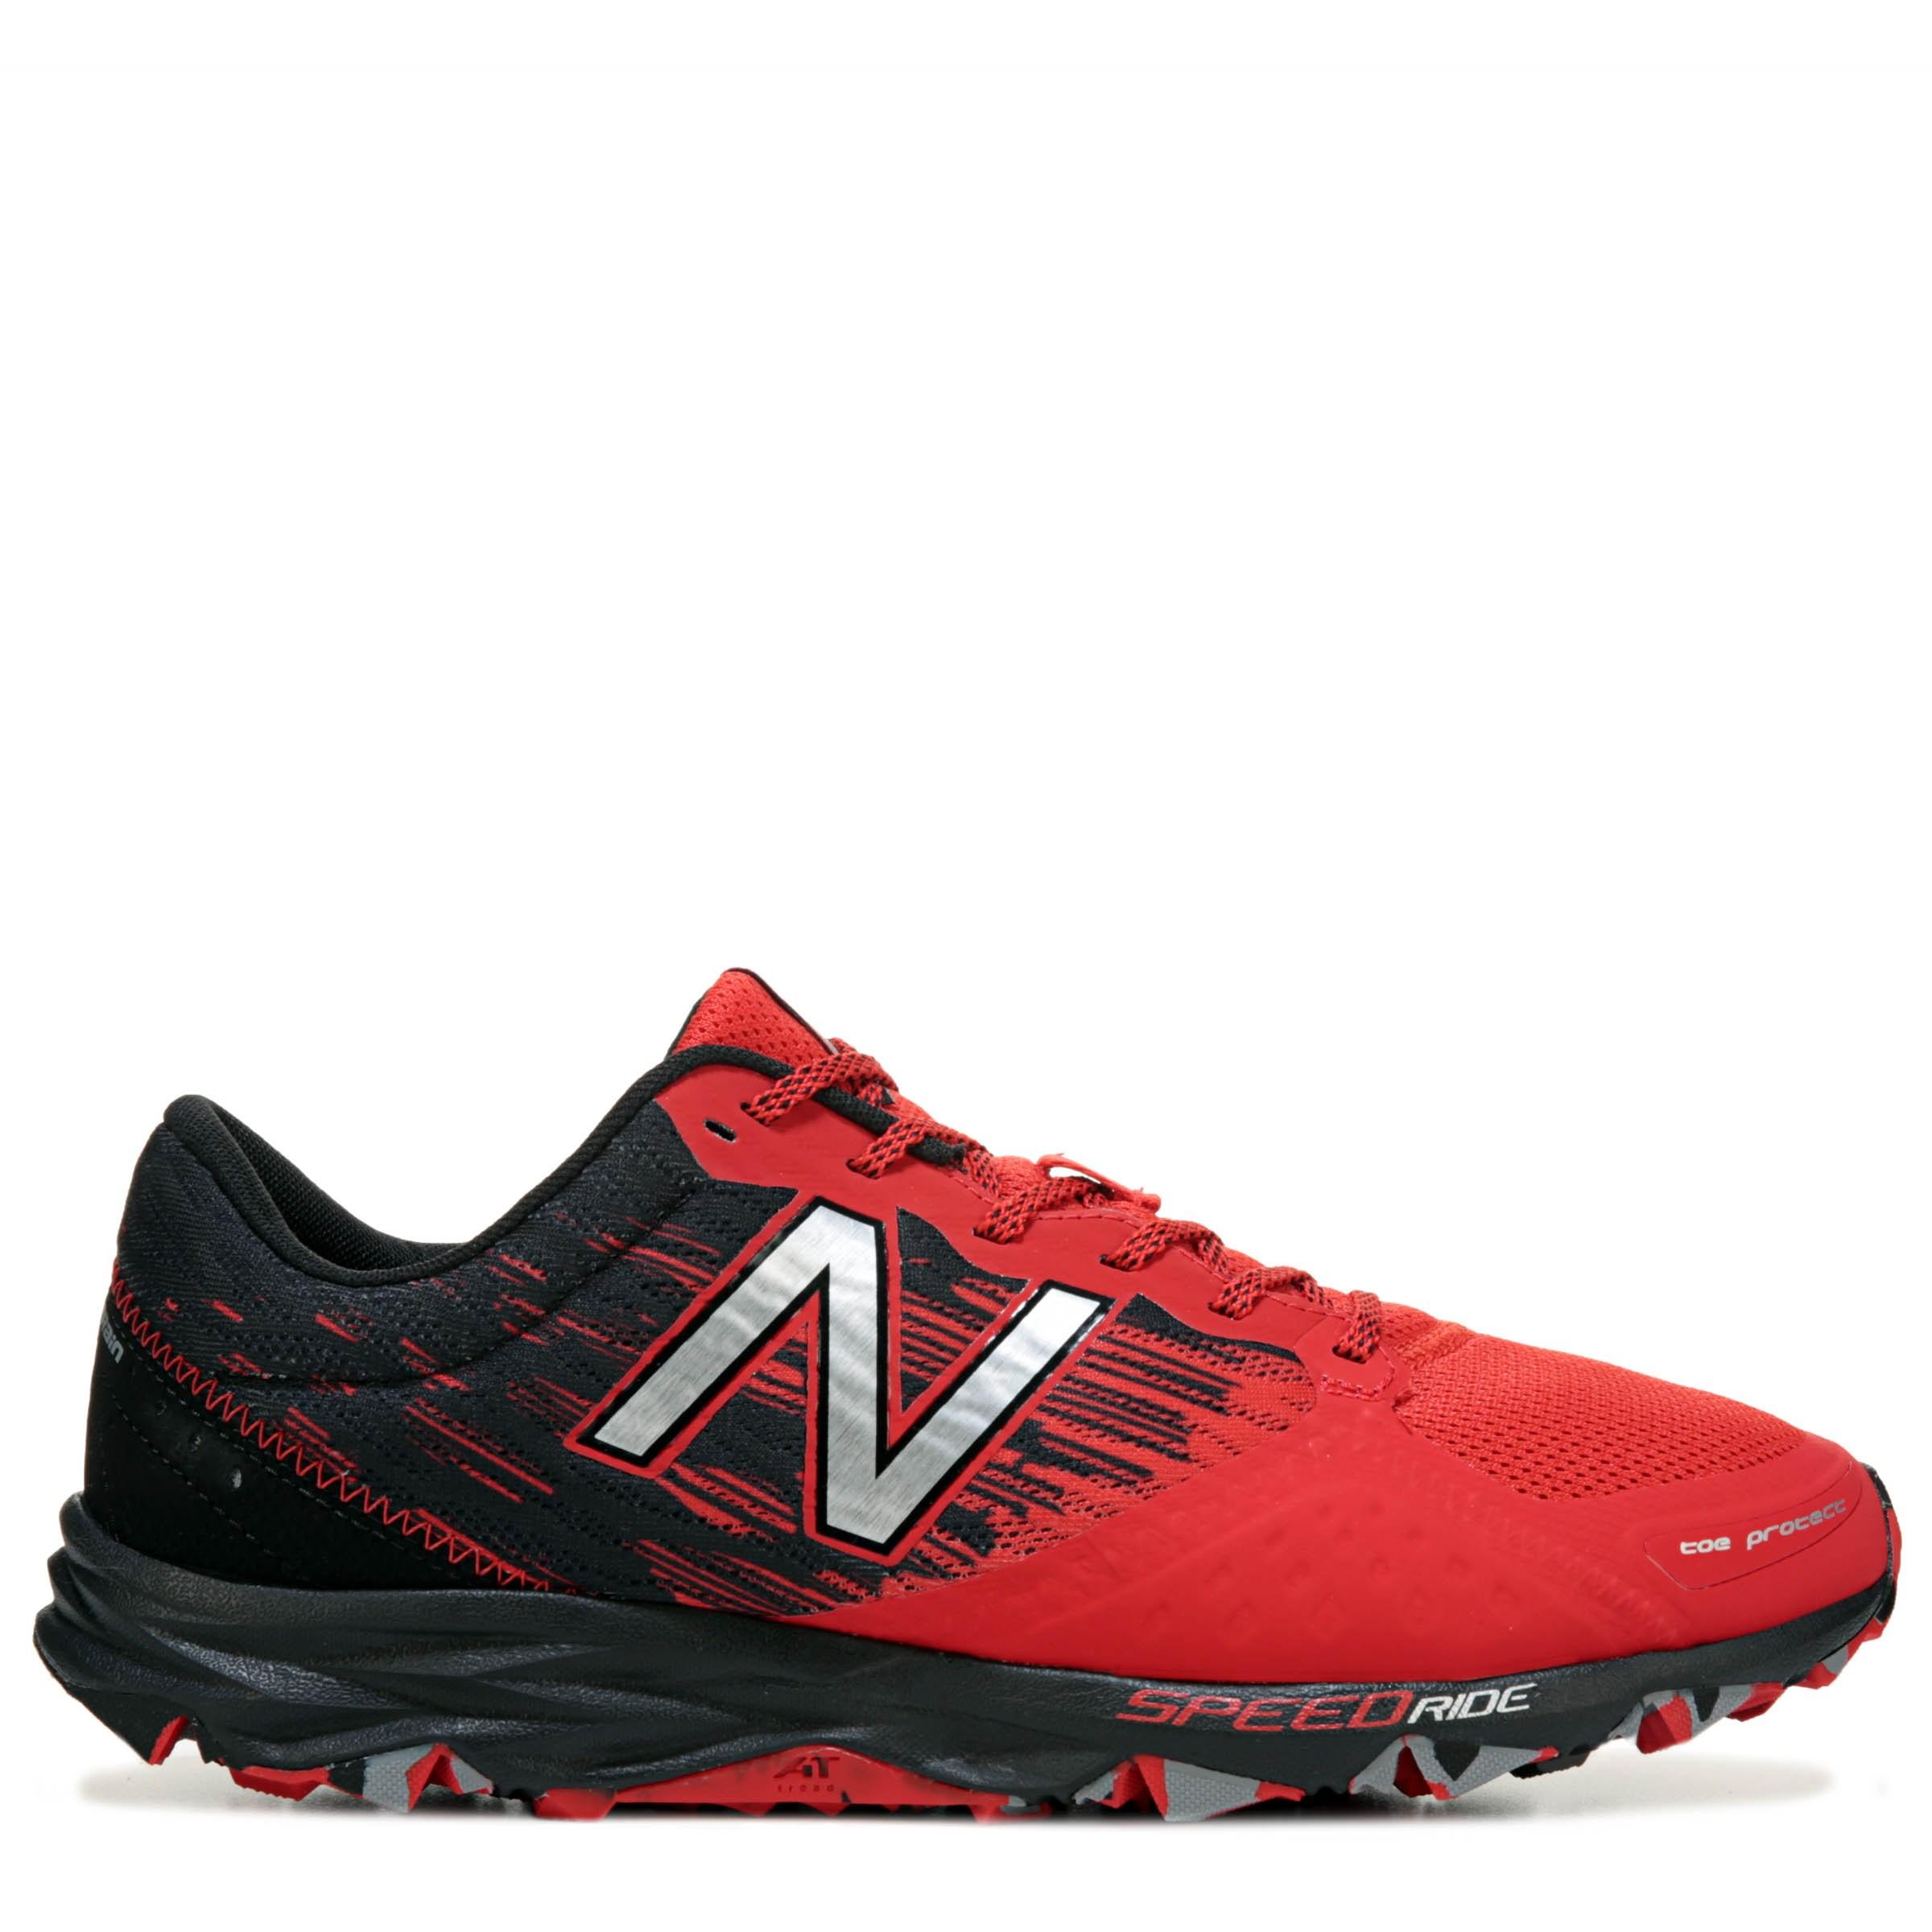 New Balance Synthetic 690 V2 Medium/wide Trail Running Shoes in Red ...